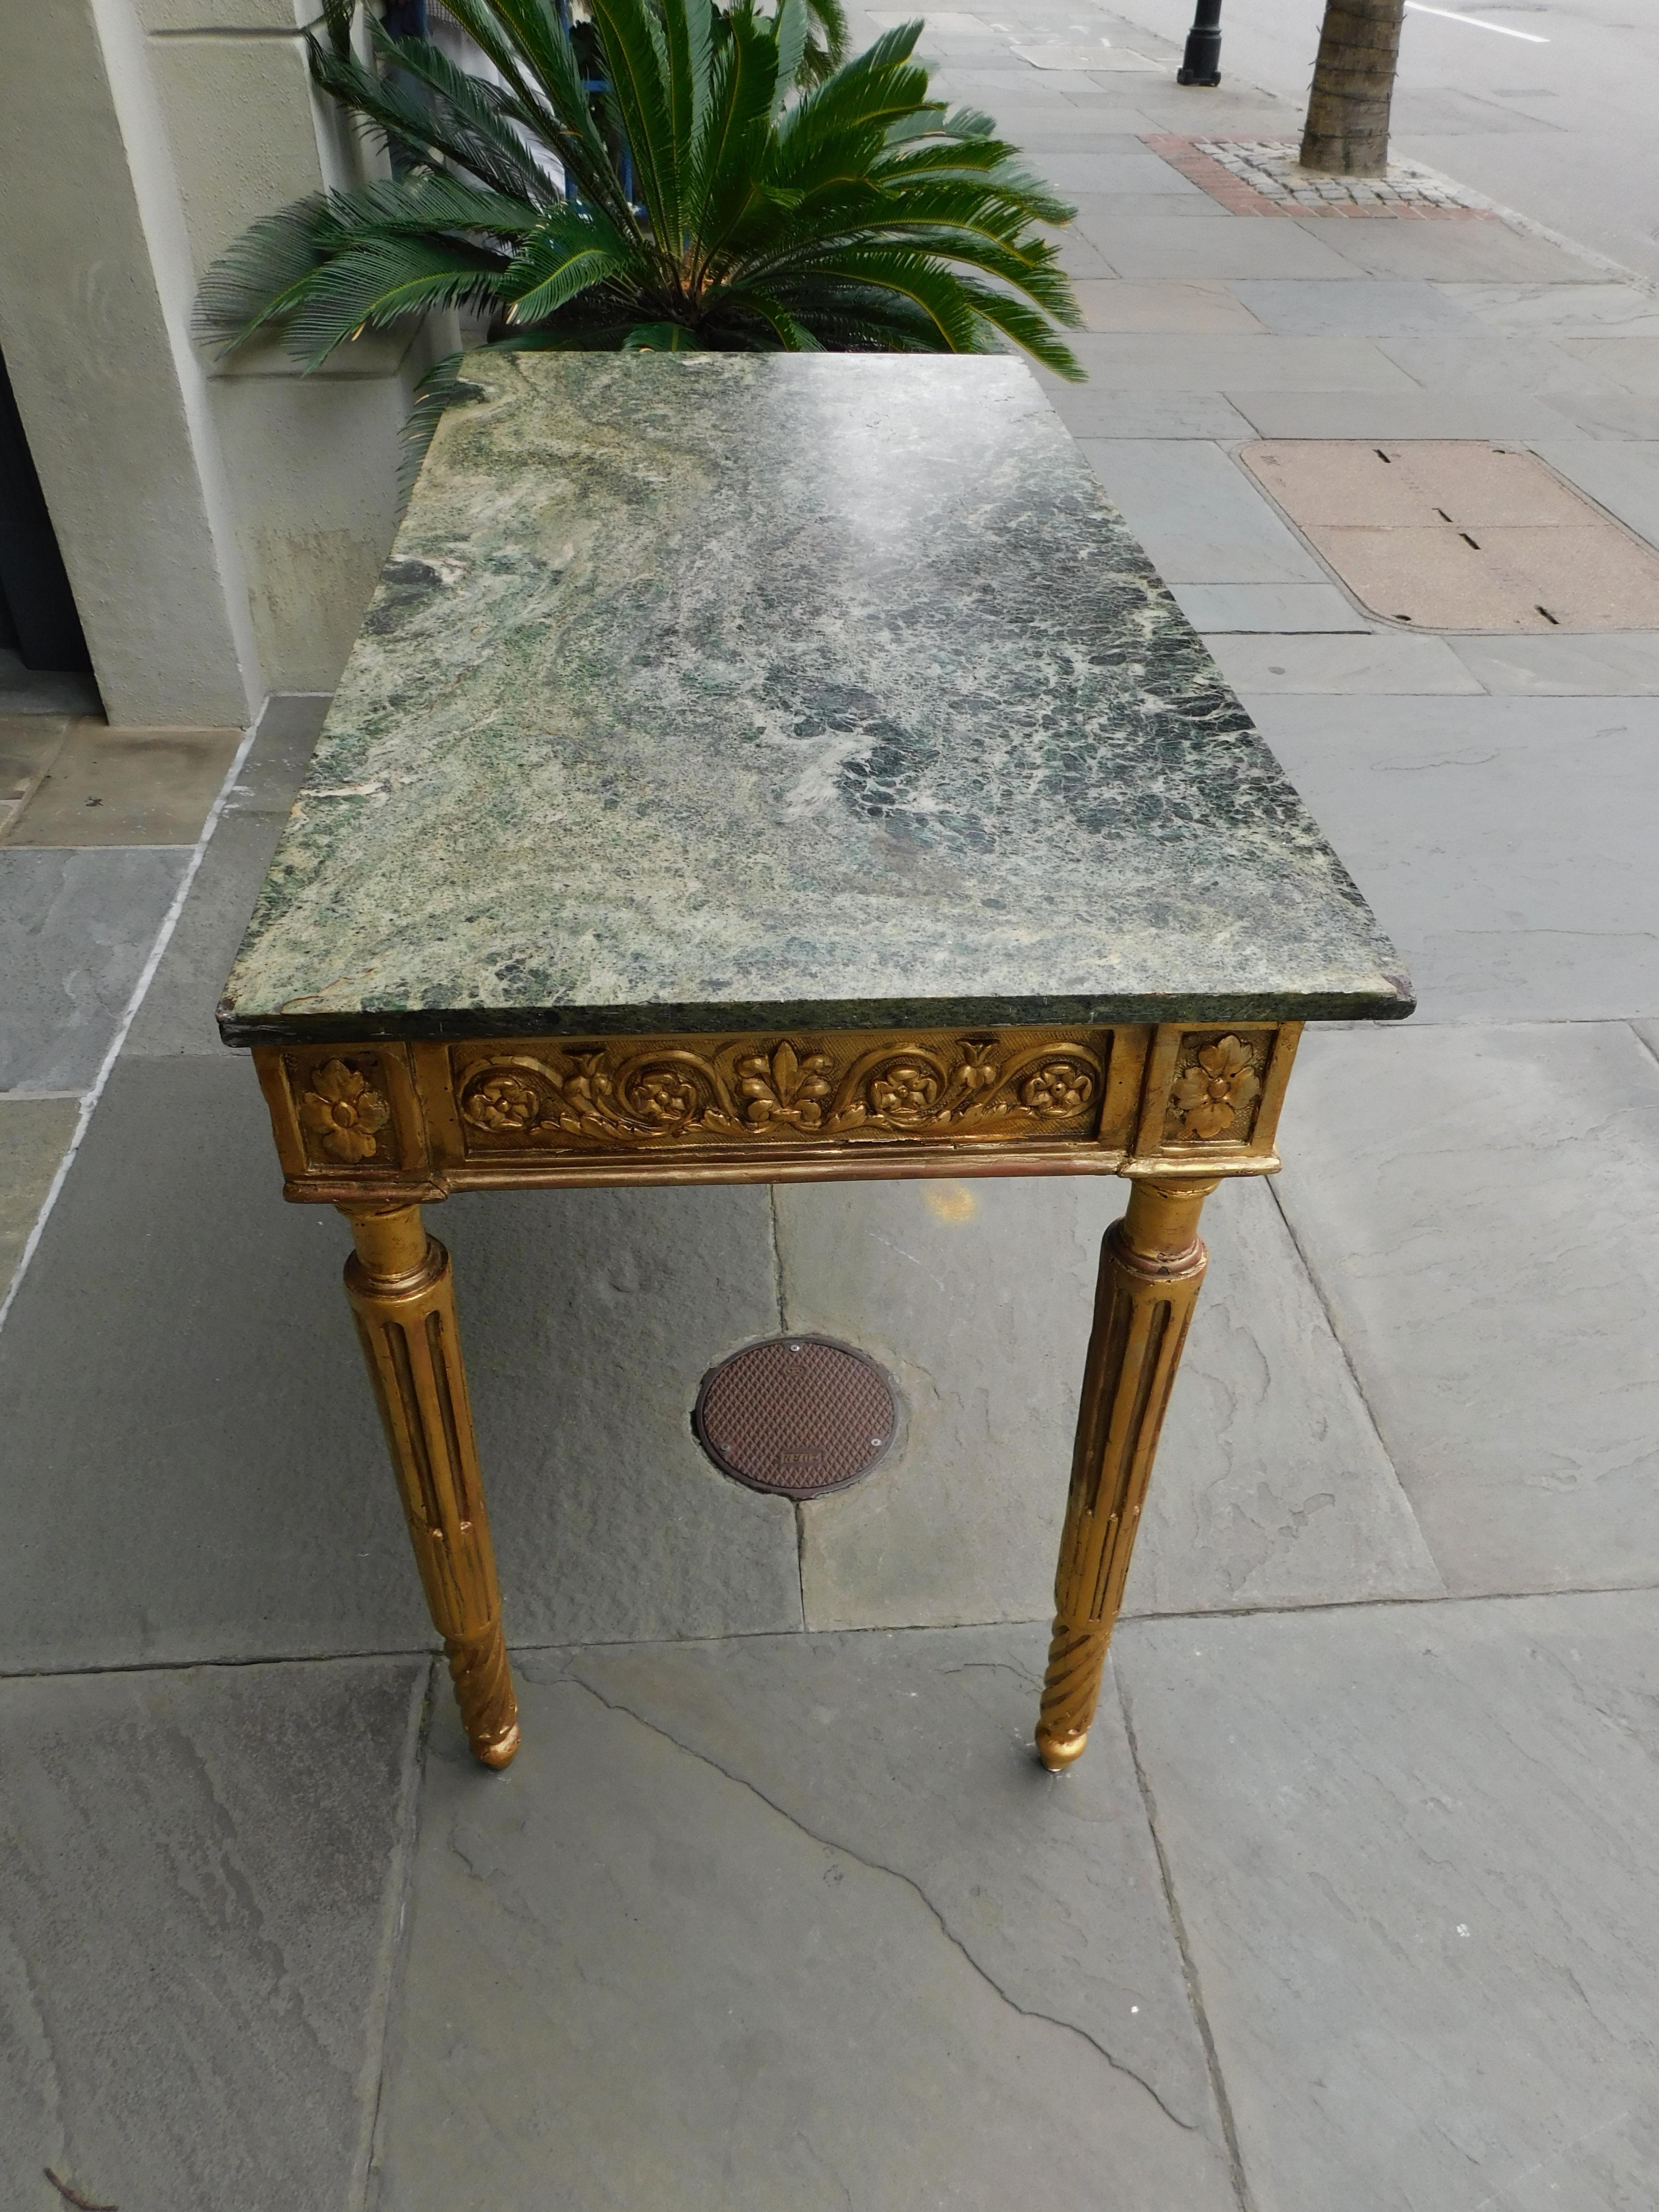 Hand-Carved Italian Gilt Wood Marble Top Foliage Console Table with Fluted Legs, Circa 1770 For Sale